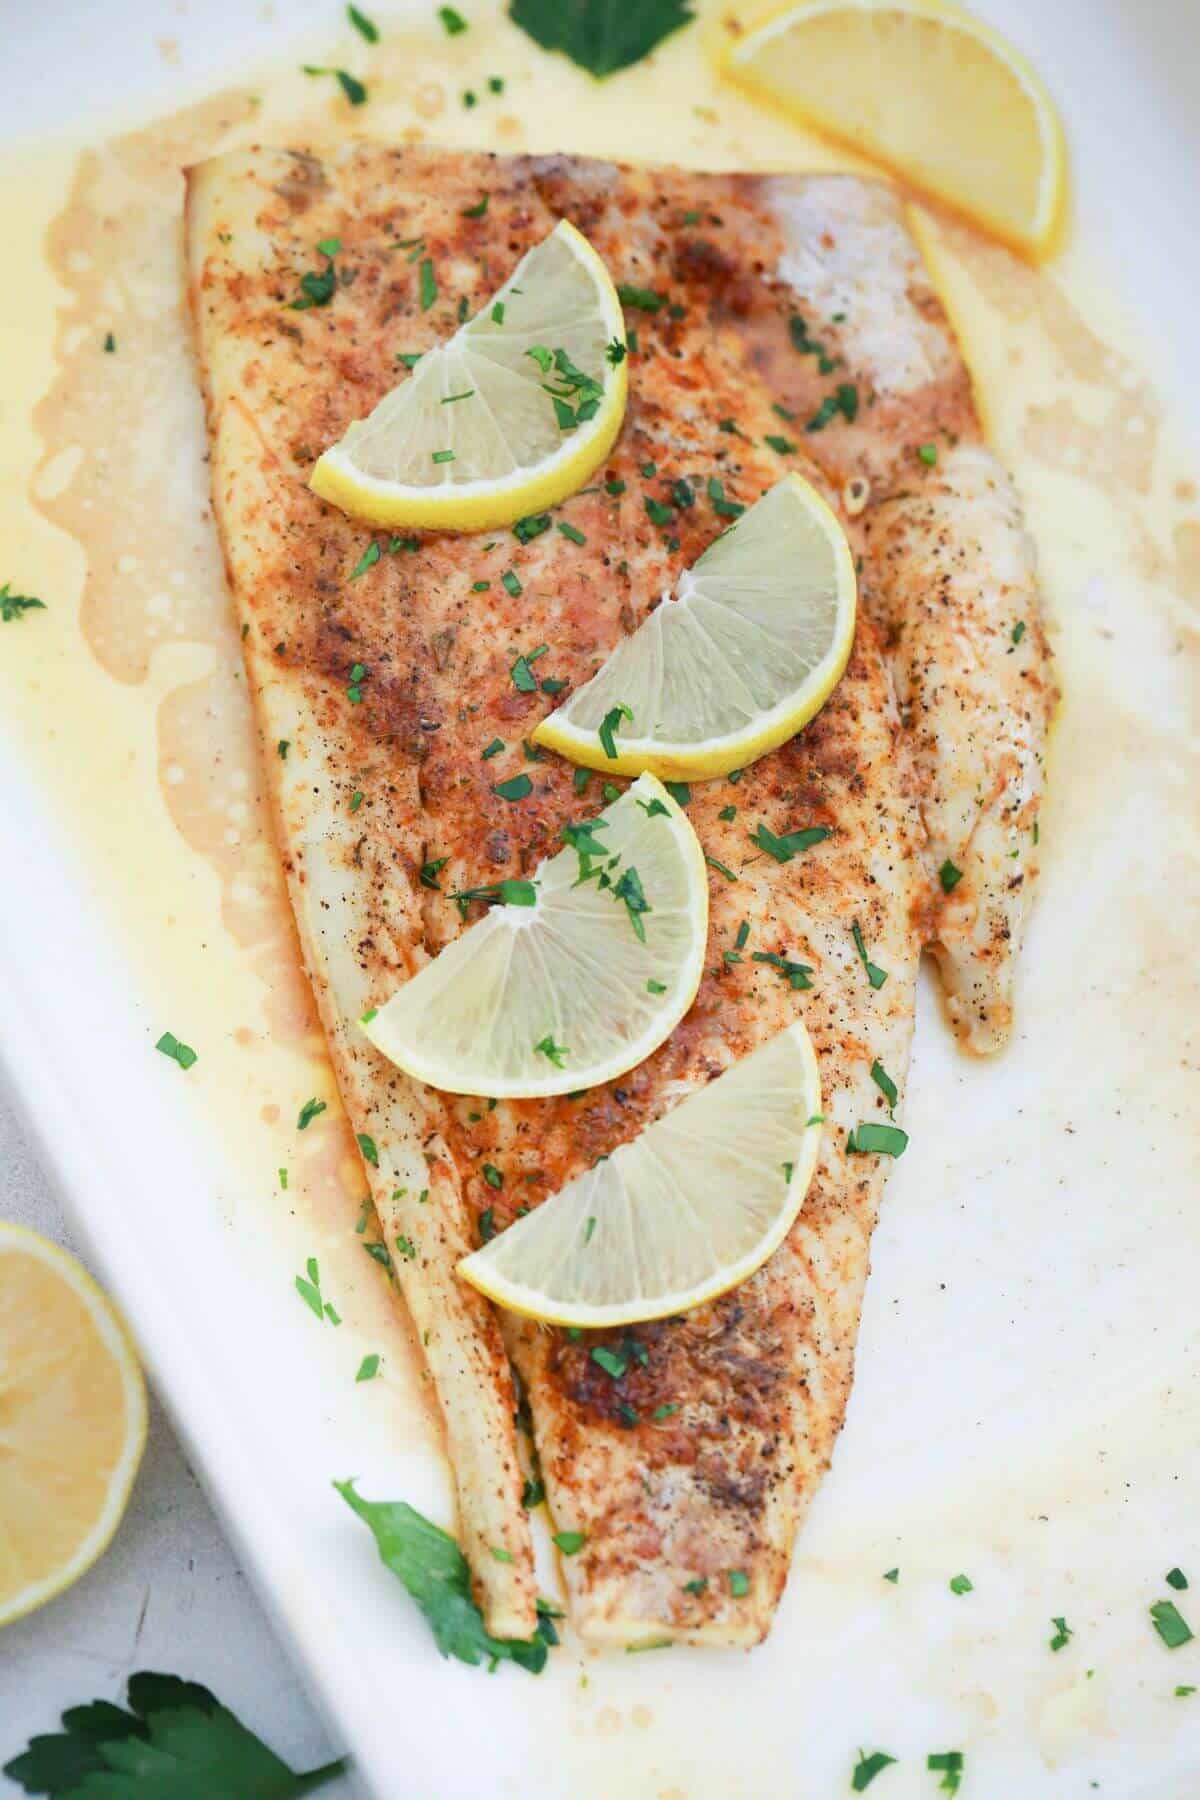 baked fish fillet topped with lemon slices.